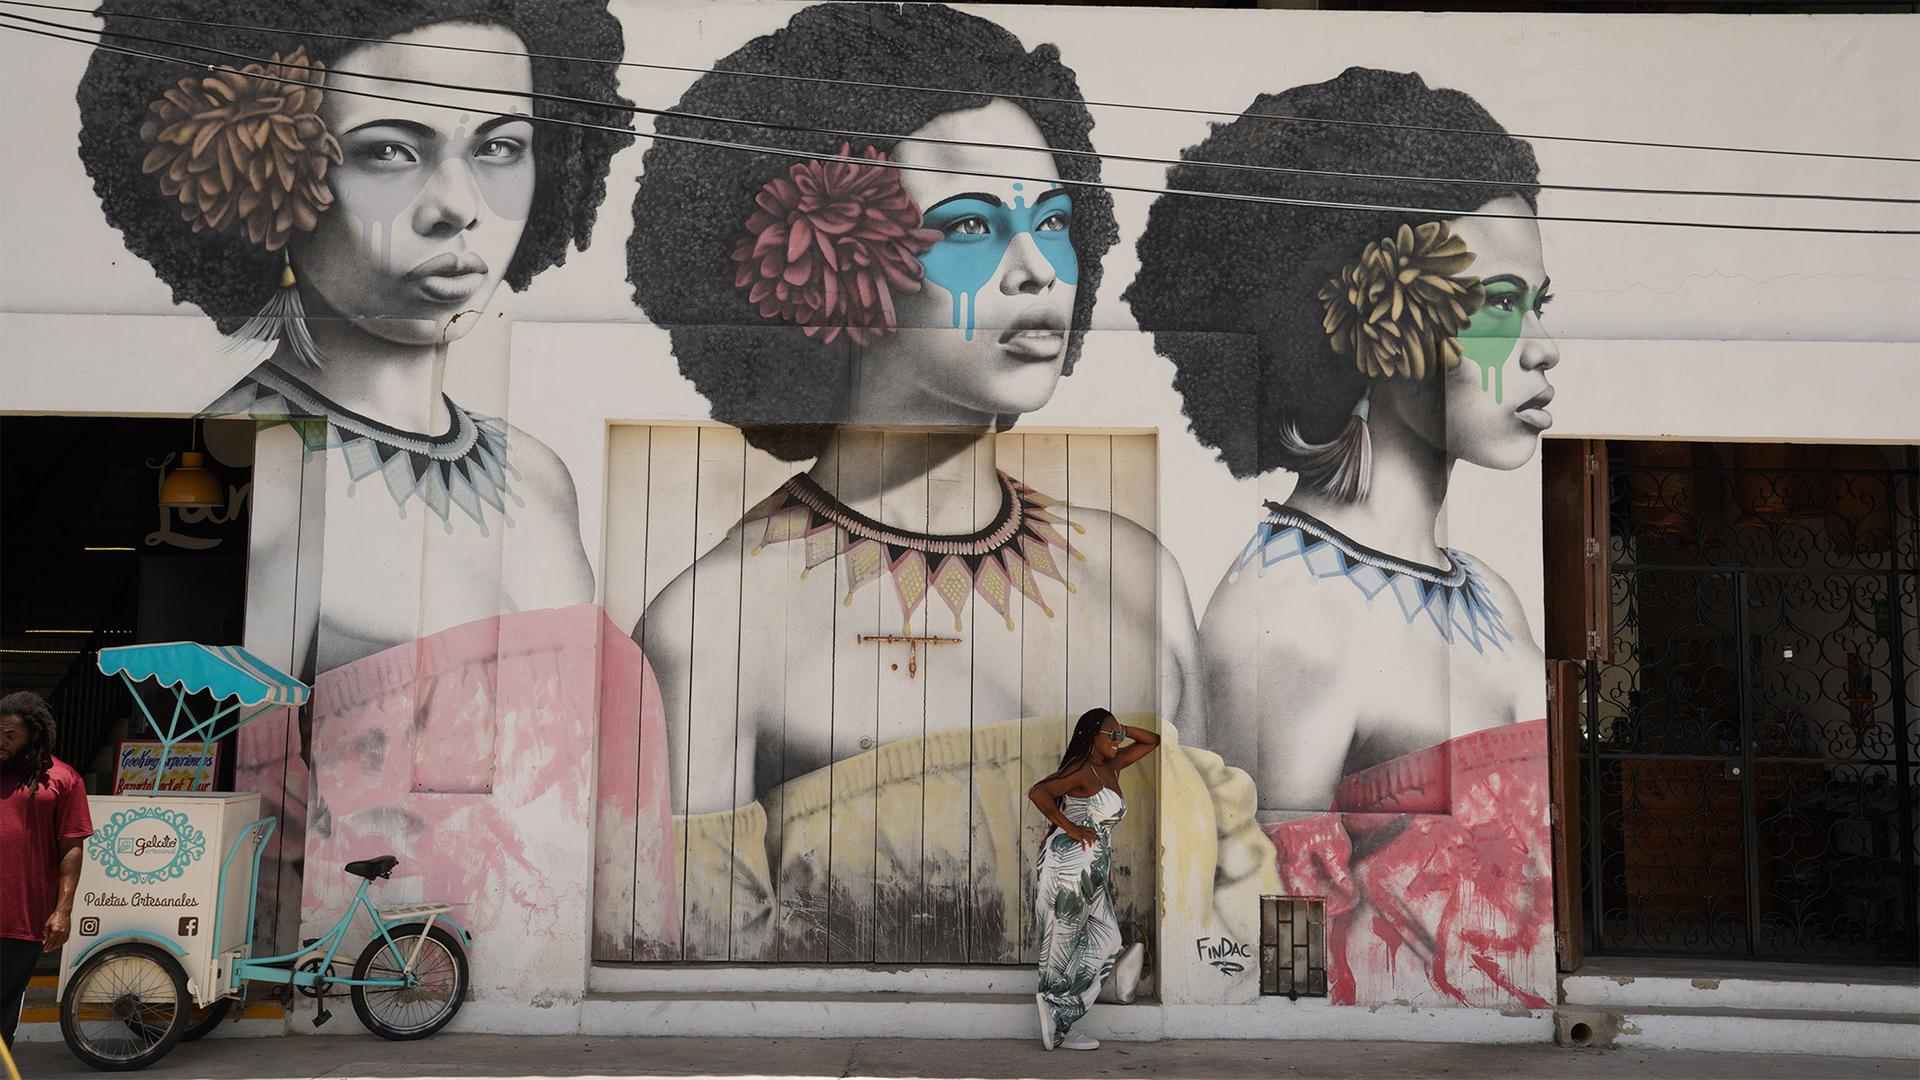 A mural in Cartagena's Getsemani Neighborhood celebrates the city's Afro-Colombian heritage and the natural hairstyles of Black women